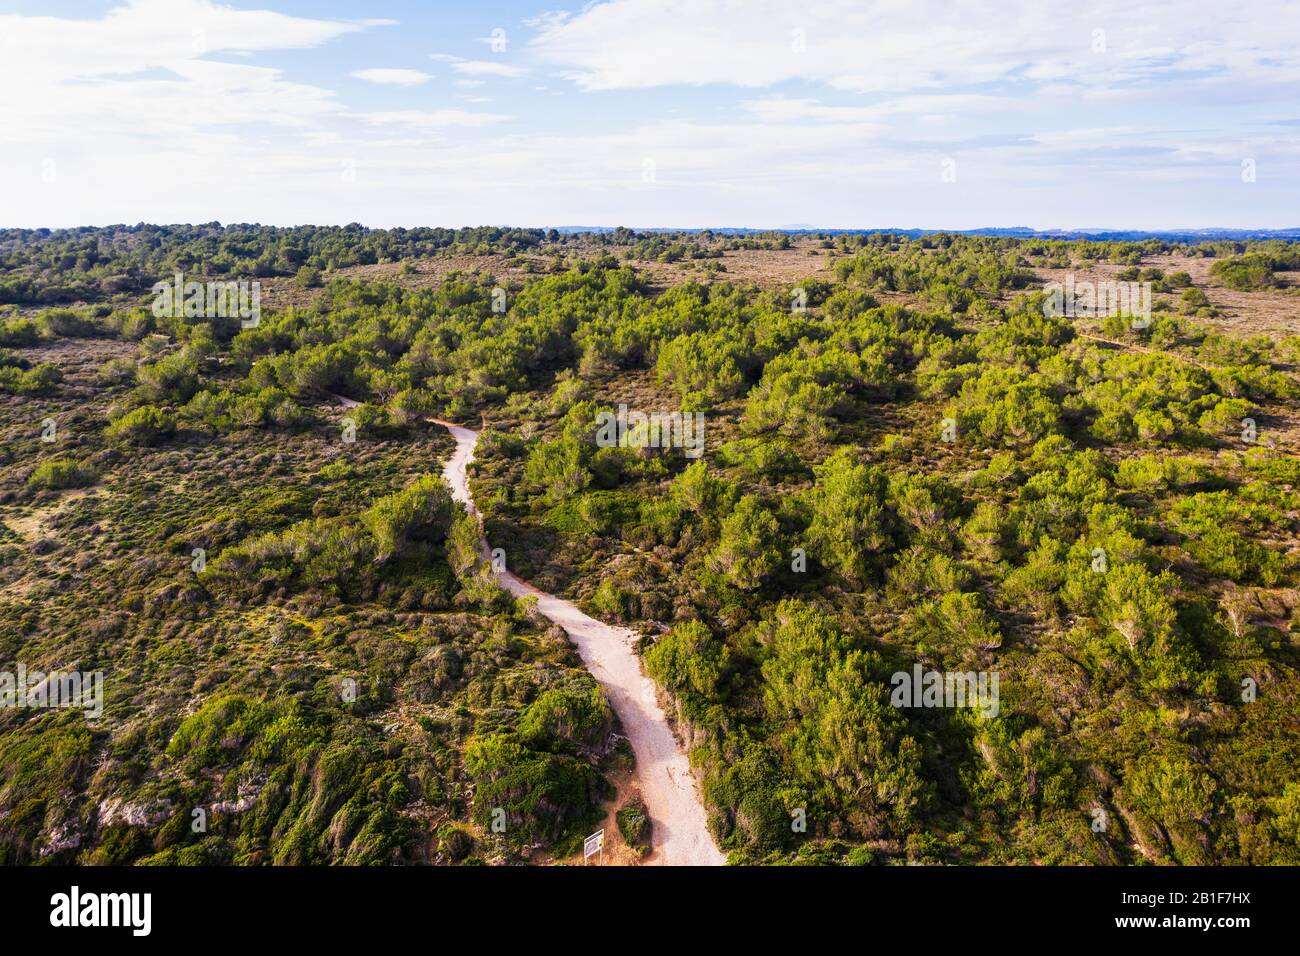 Son Real coastal protected area with pines, near Can Picafort, drone recording, Majorca, Balearic Islands, Spain Stock Photo